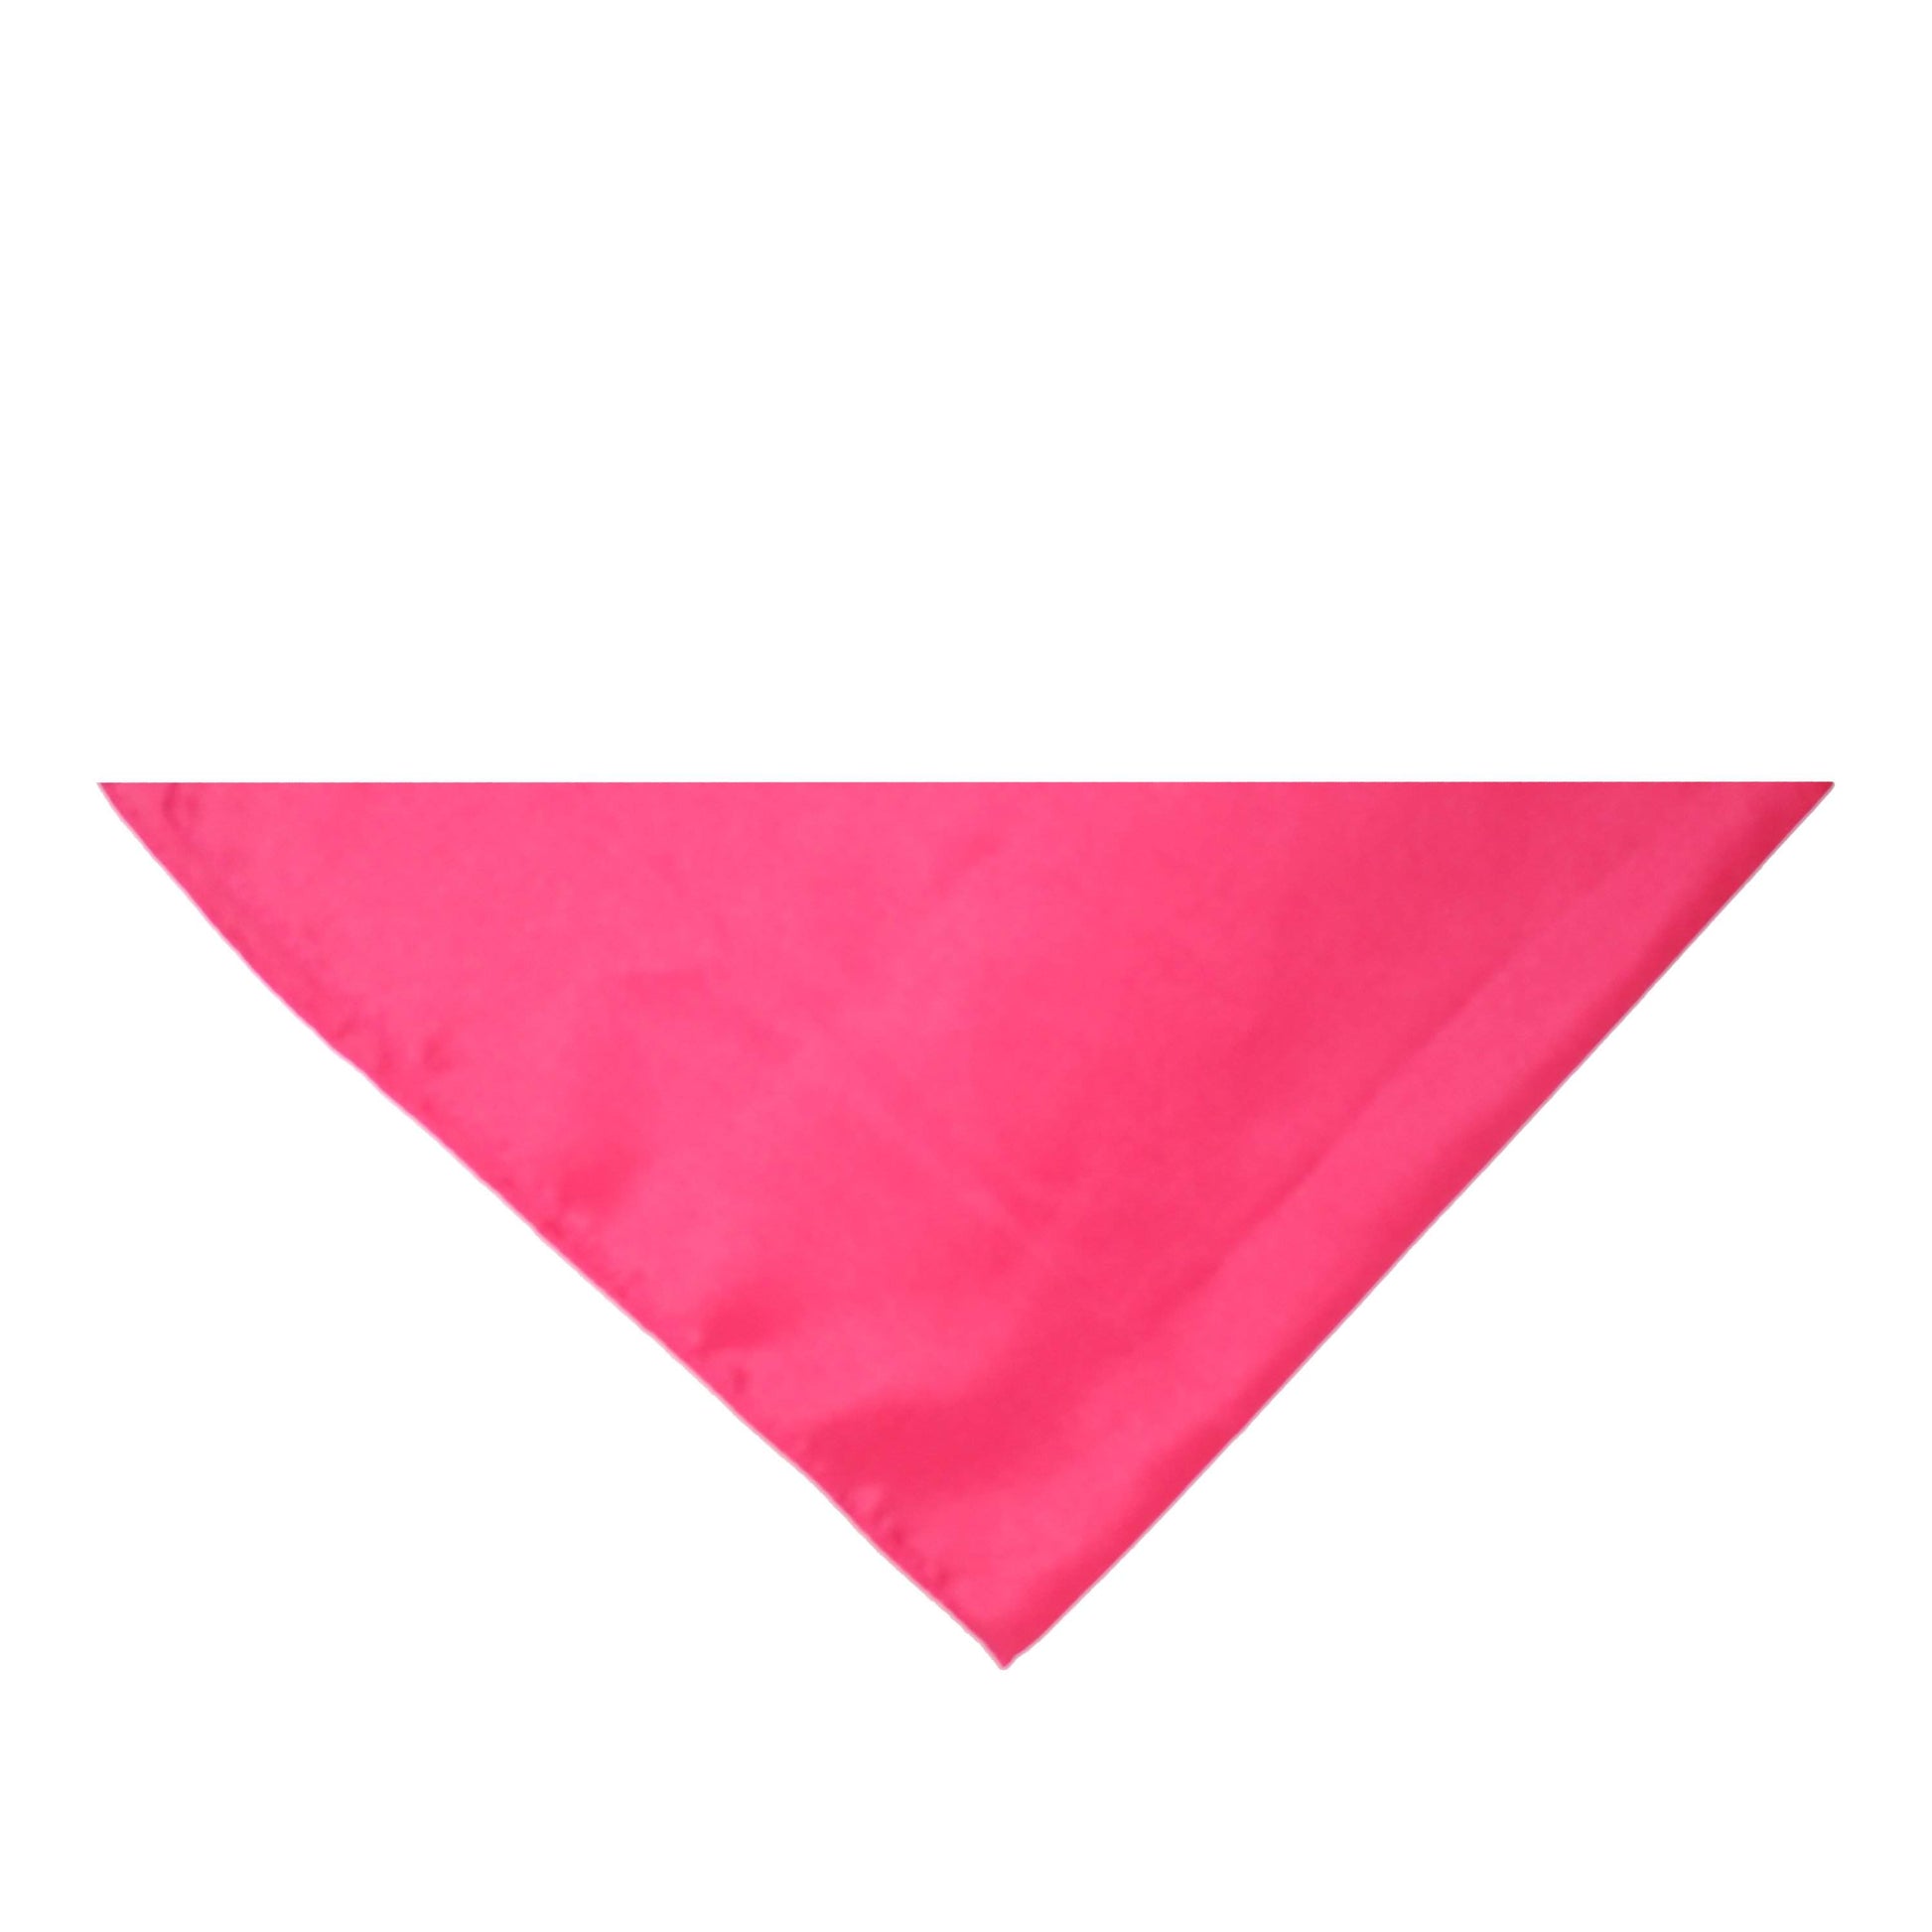 Pack of 11 Jordefano Triangle Cotton Bandanas - Solid Colors and Polyester - 30 in x 19 in x 19 in